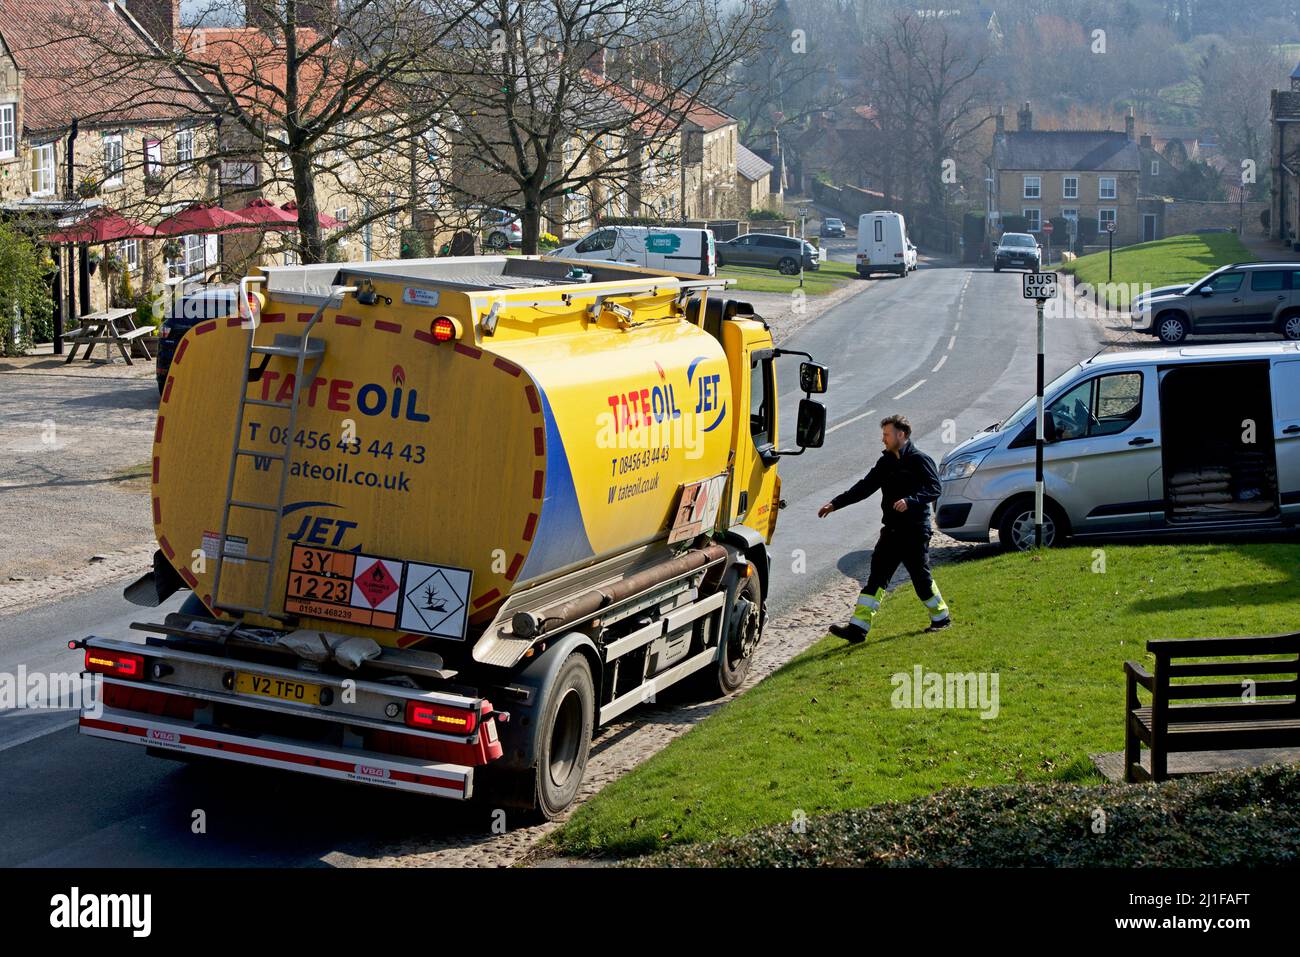 Tate oil lorry, delivering domestic heating oil to house in the village of Coxwold, in Hambleton district, North Yorkshire, England UK Stock Photo